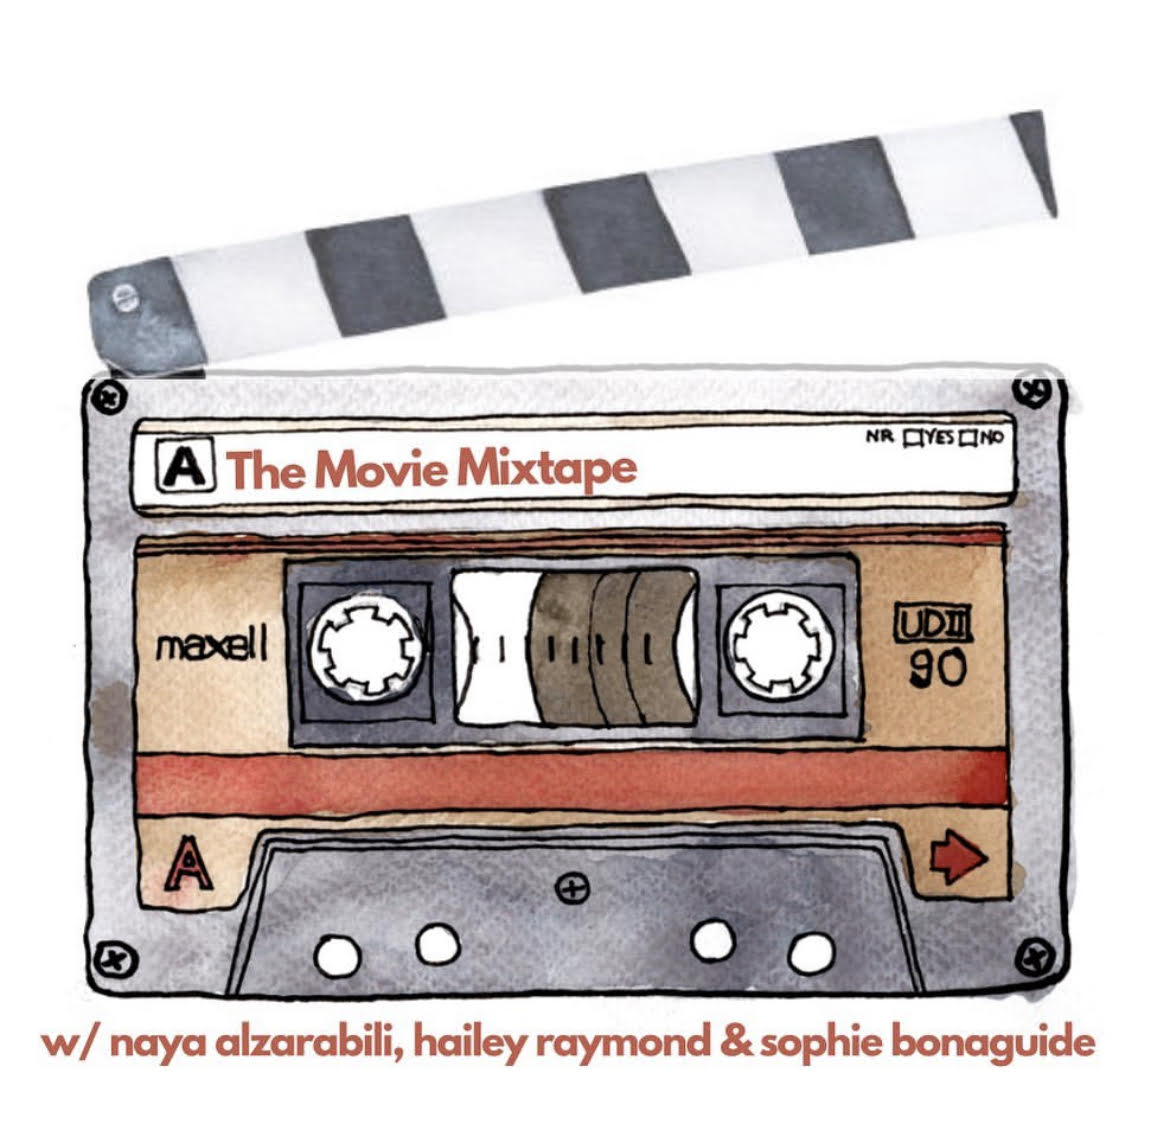 [VIDEO] Movie Mixtape podcast, Ep. 1: 10 Things I Hate About You